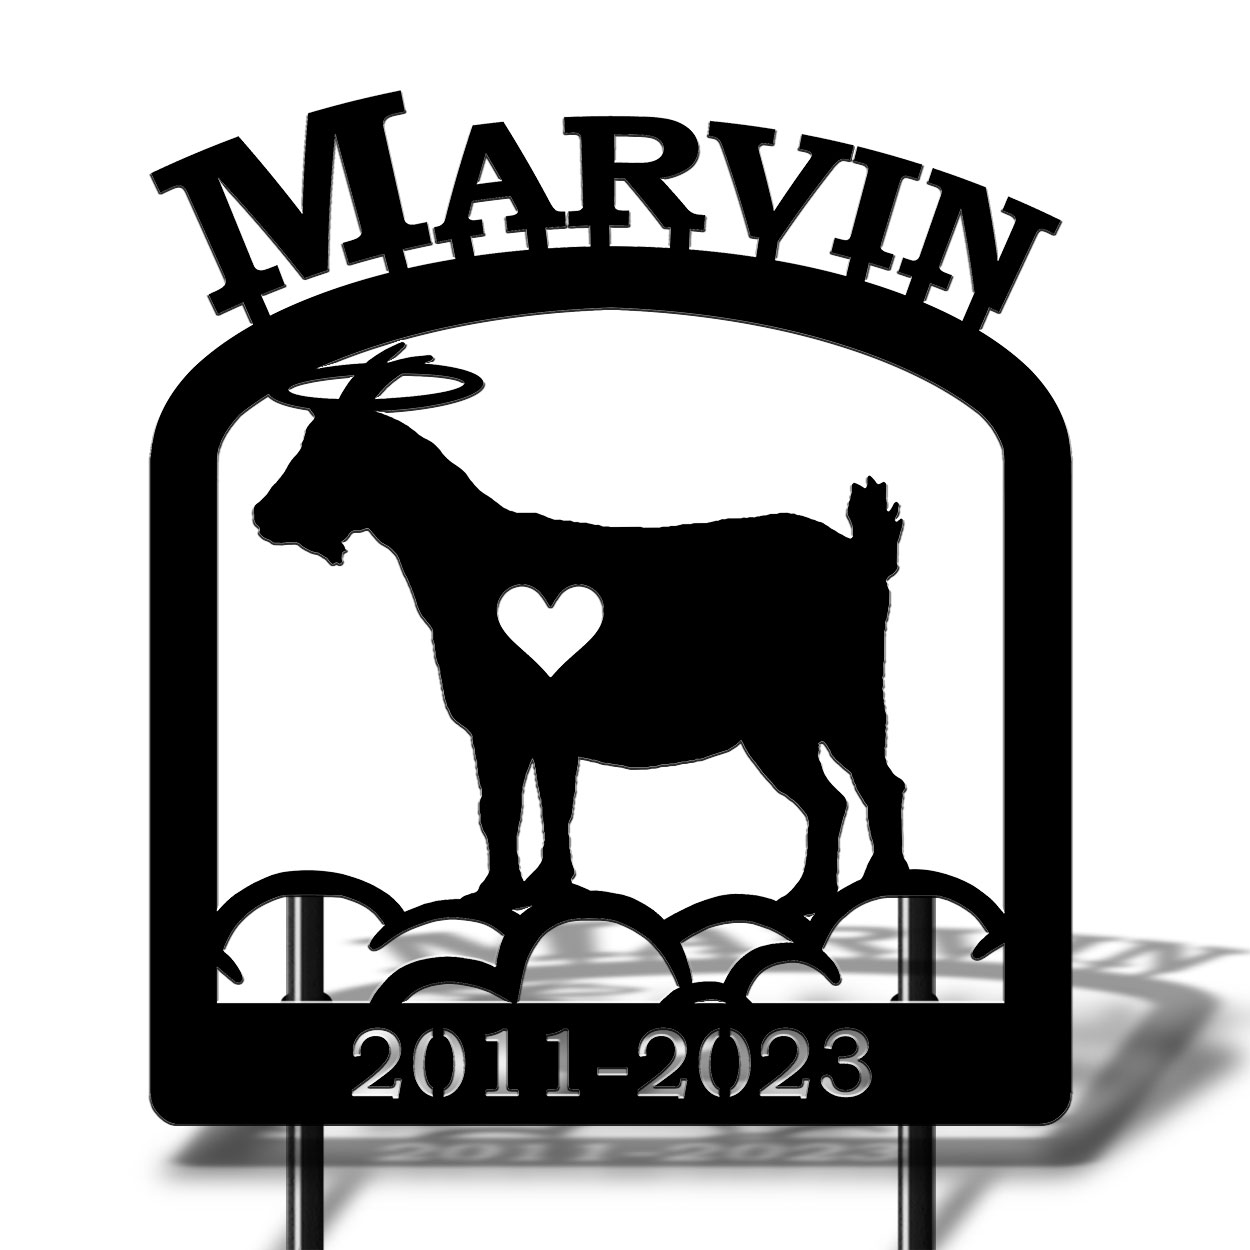 601780 - Goat With Horns Personalized Pet Memorial Yard Art